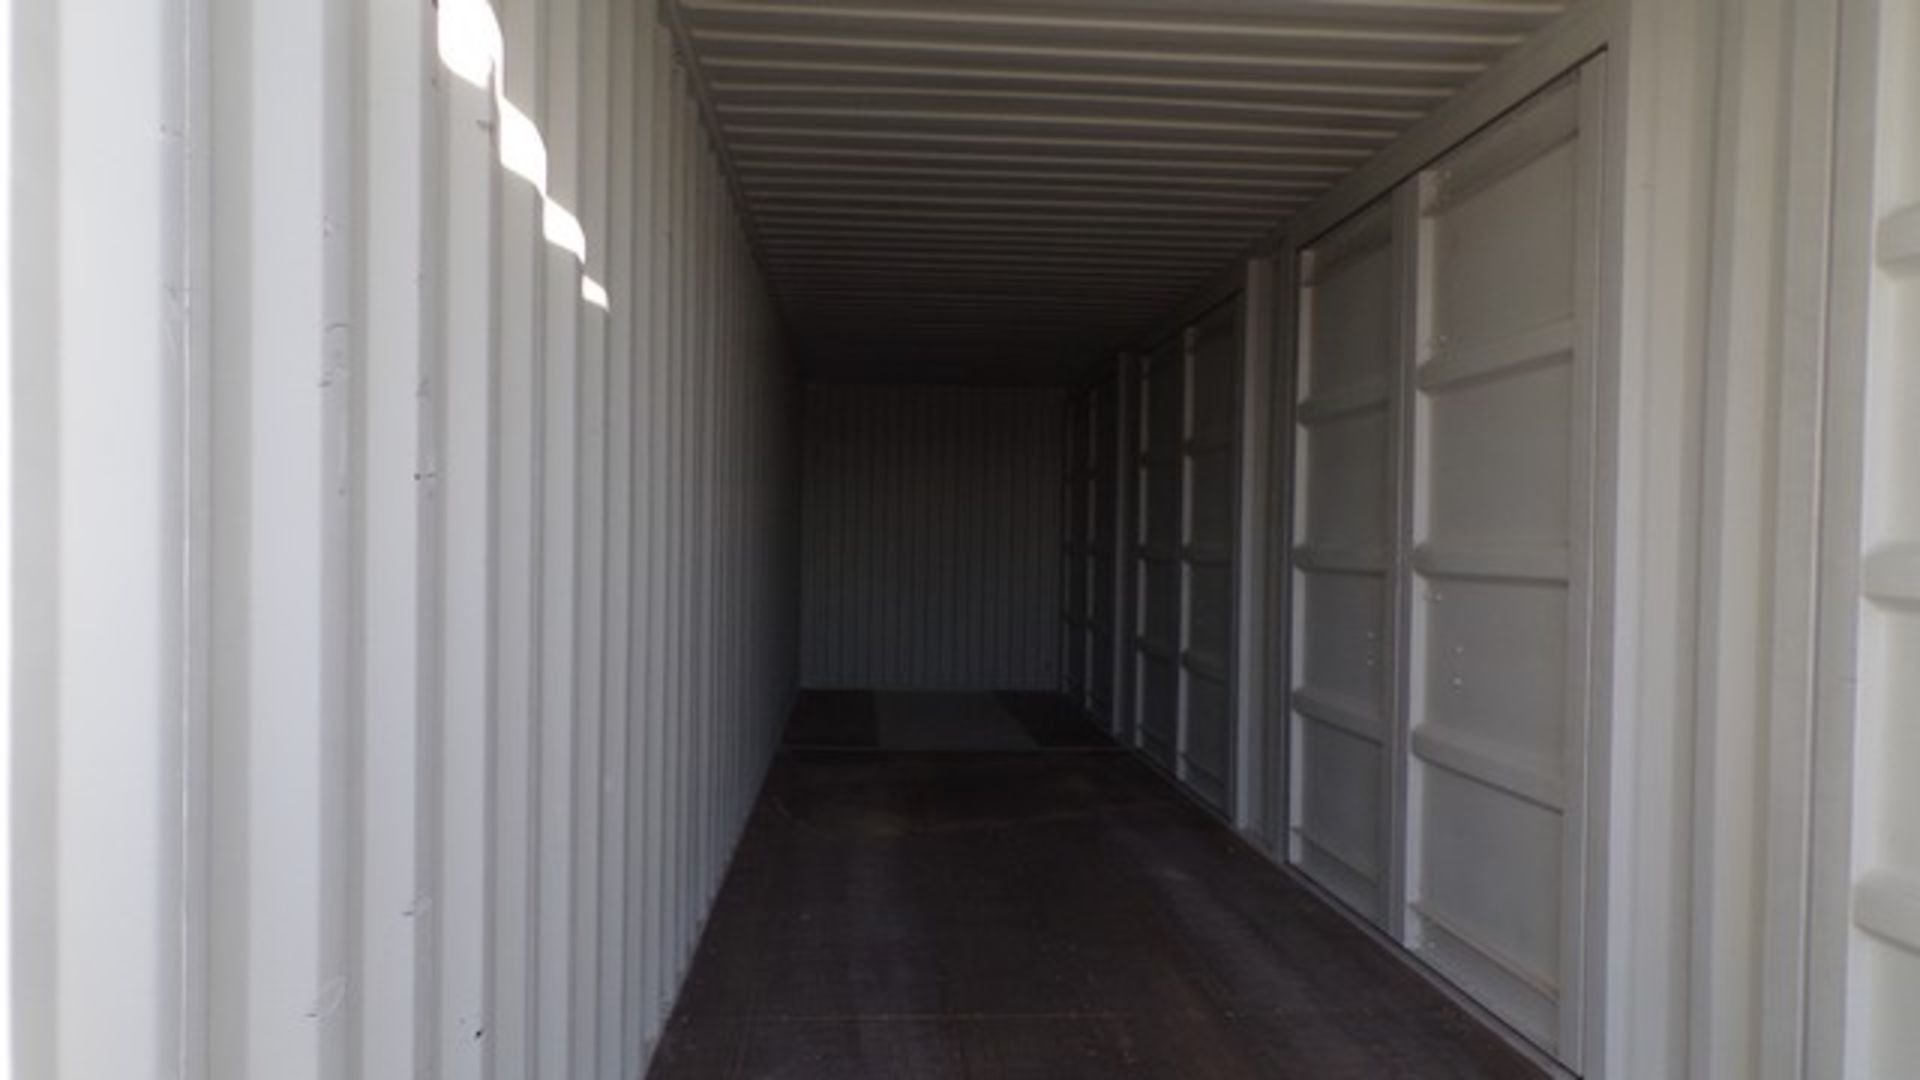 Located in YARD 1 - Midland, TX 40' H CUB SEA CONTAINER W/ (4) SIDE OPEN DOORS, (1) END DOOR - Image 2 of 5